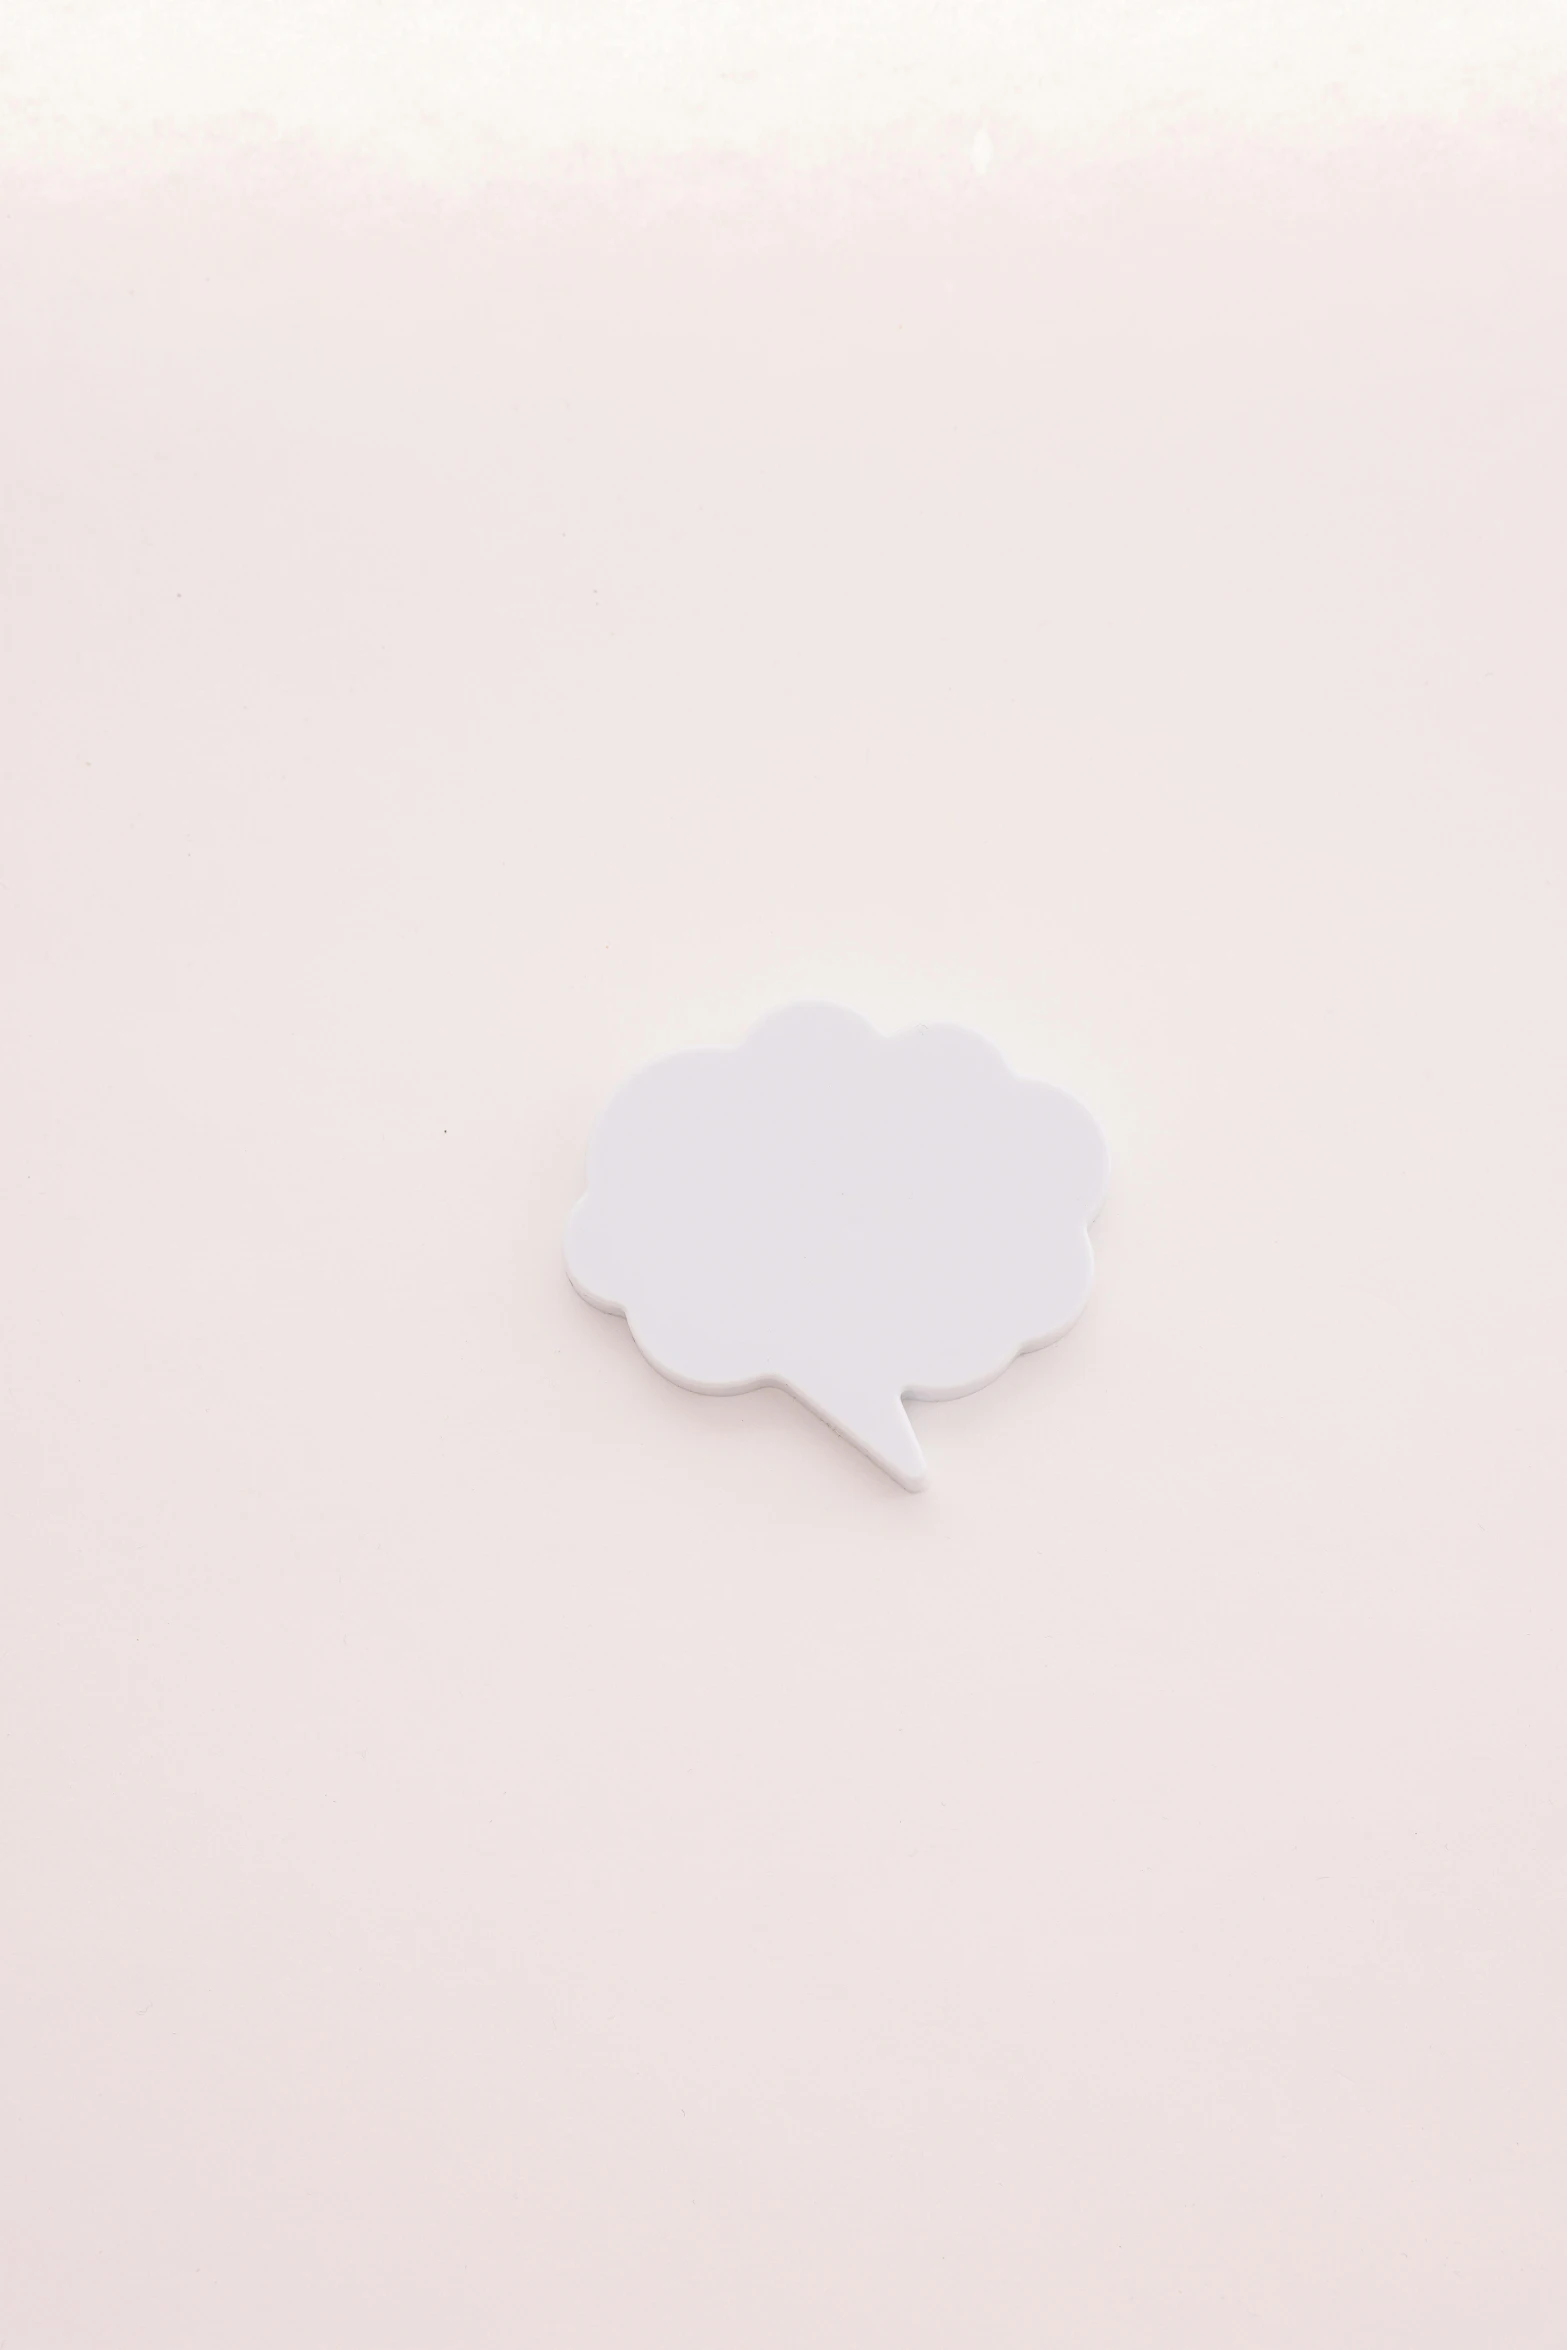 a laptop with a speech bubble cut out of it, trending on unsplash, cumulus cloud tattoos, 9 0 mm studio photograph tiny, ! dream, silicone patch design